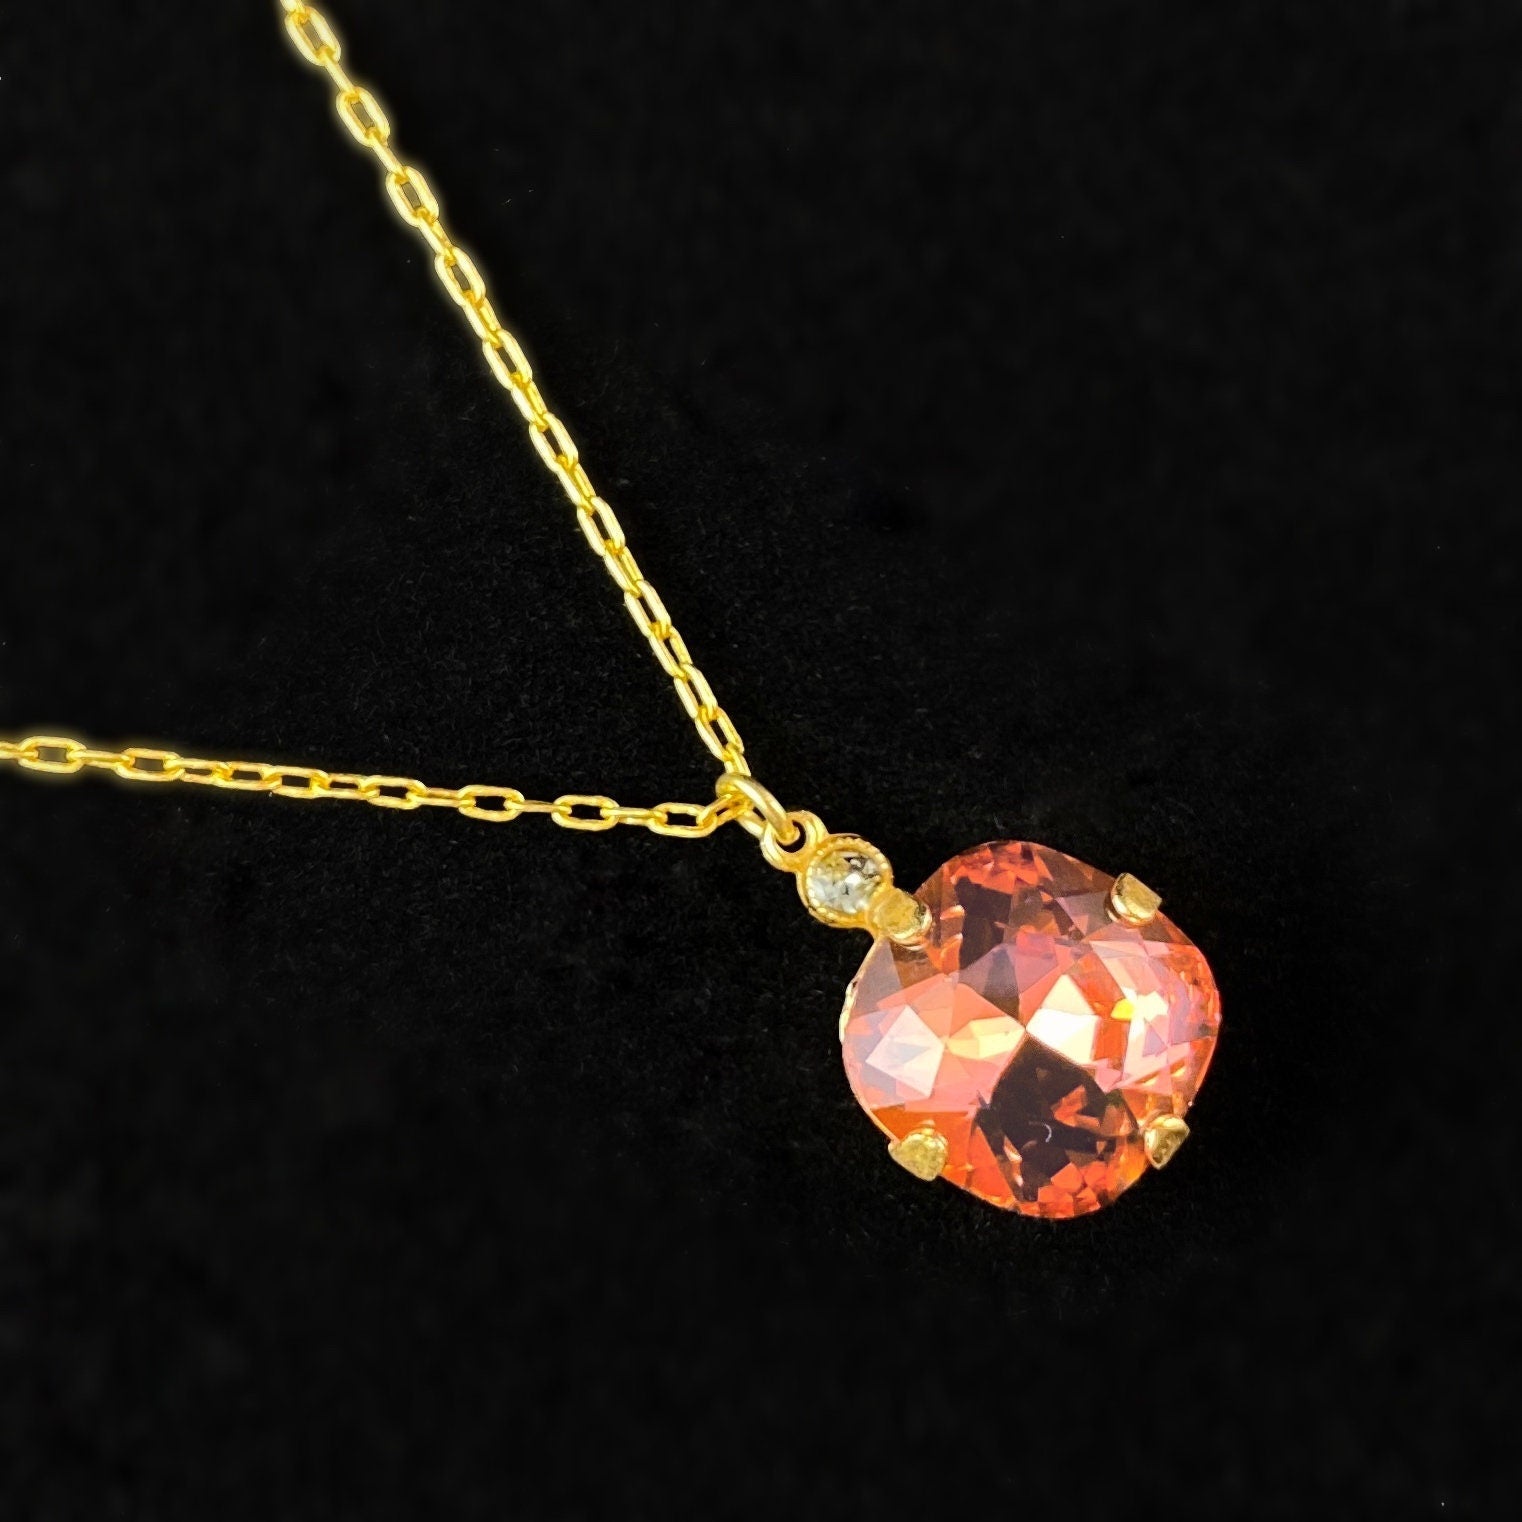 Coral Pink Cushion Cut Swarovski Crystal Pendant with Tiny Crystal Detailing - La Vie Parisienne by Catherine Popesco